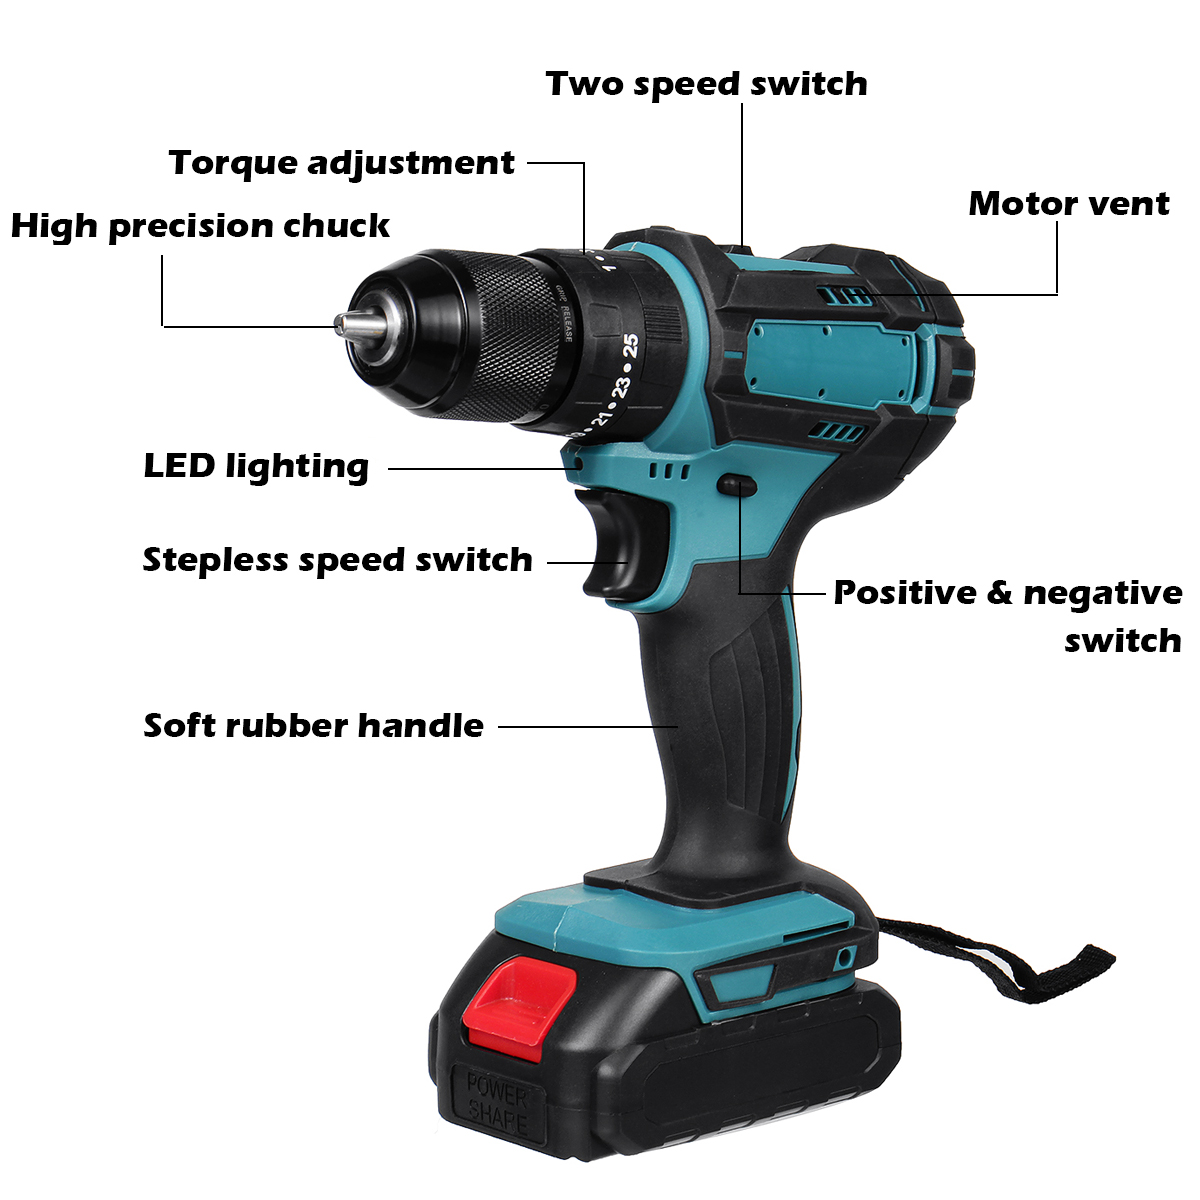 350Nm-4000-rpm-Electric-drill-3-In-1-Hammer-Flat-Drill-Screwdriver-Churn-Drill-with-Battery-1955074-2